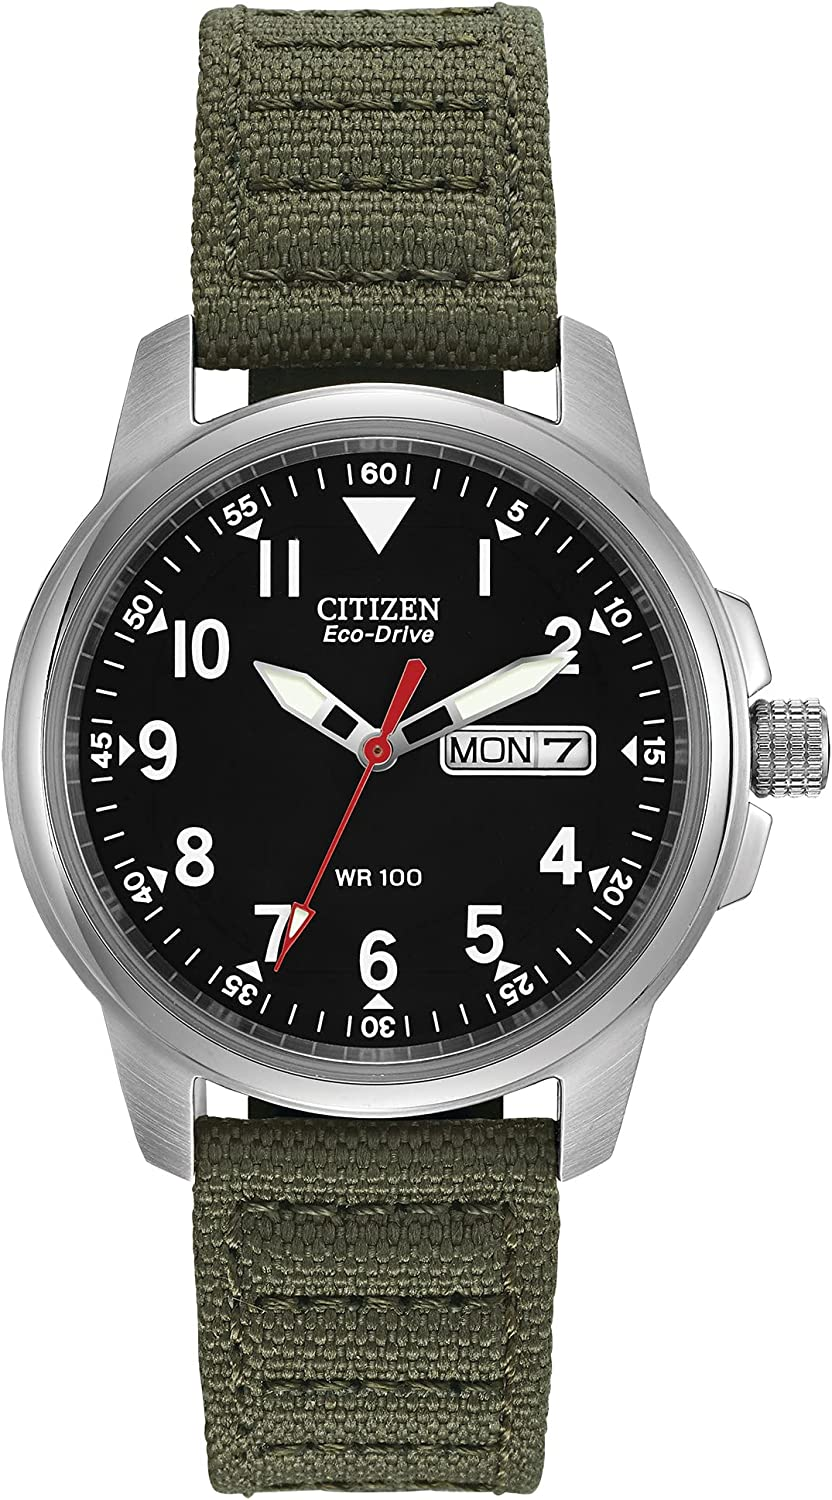 Amazon.com: Citizen Men's Eco-Drive Weekender Garrison Field Watch in Stainless Steel with Olive Nylon strap, Black Dial (Model: BM8180-03E) : Clothing, Shoes & Jewelry $114.85